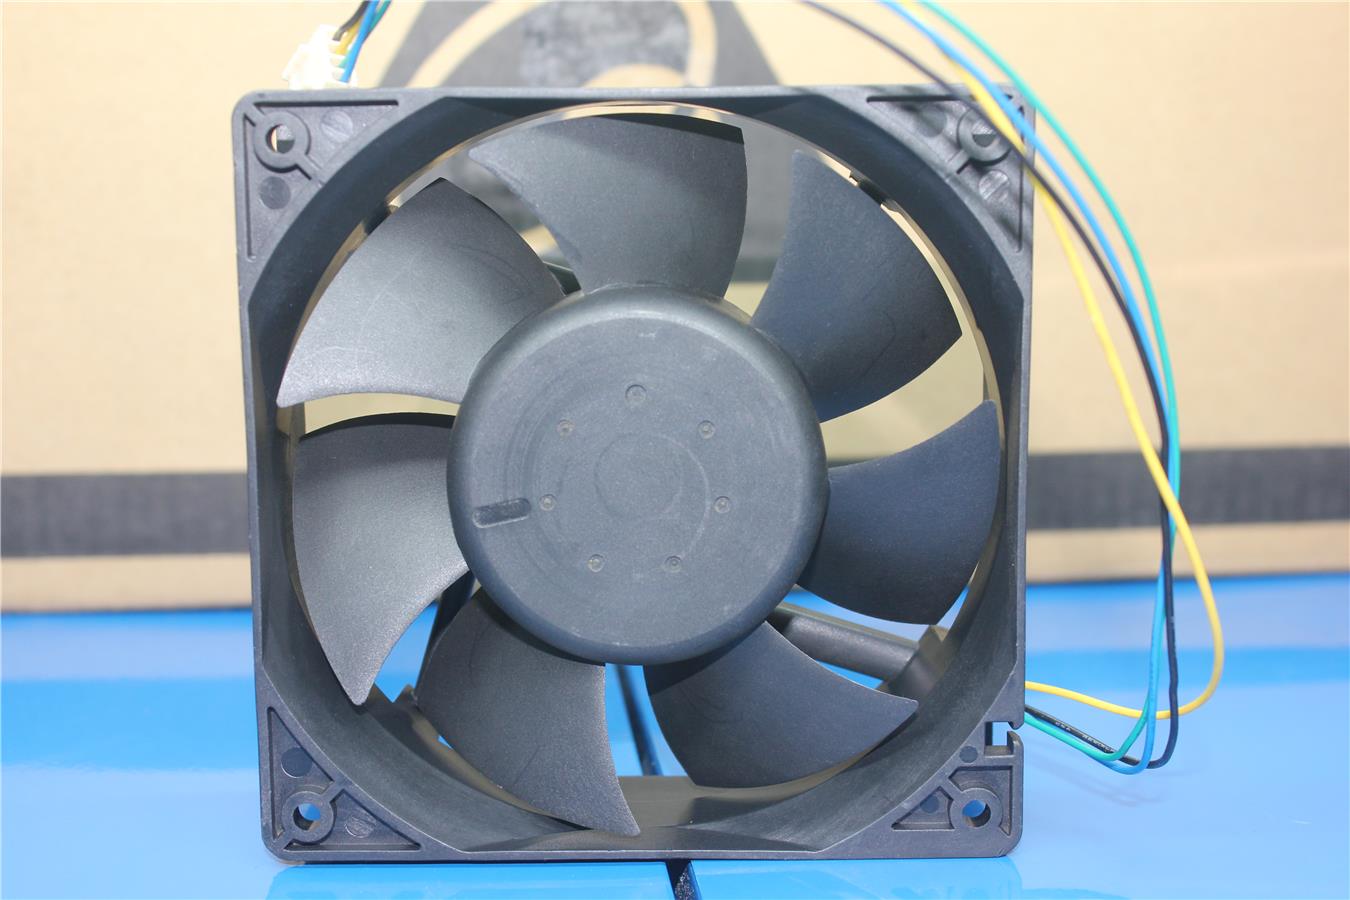 Delta AFB1212HHE 12cm 12V 0.70A double ball four-wire PWM cooling fan